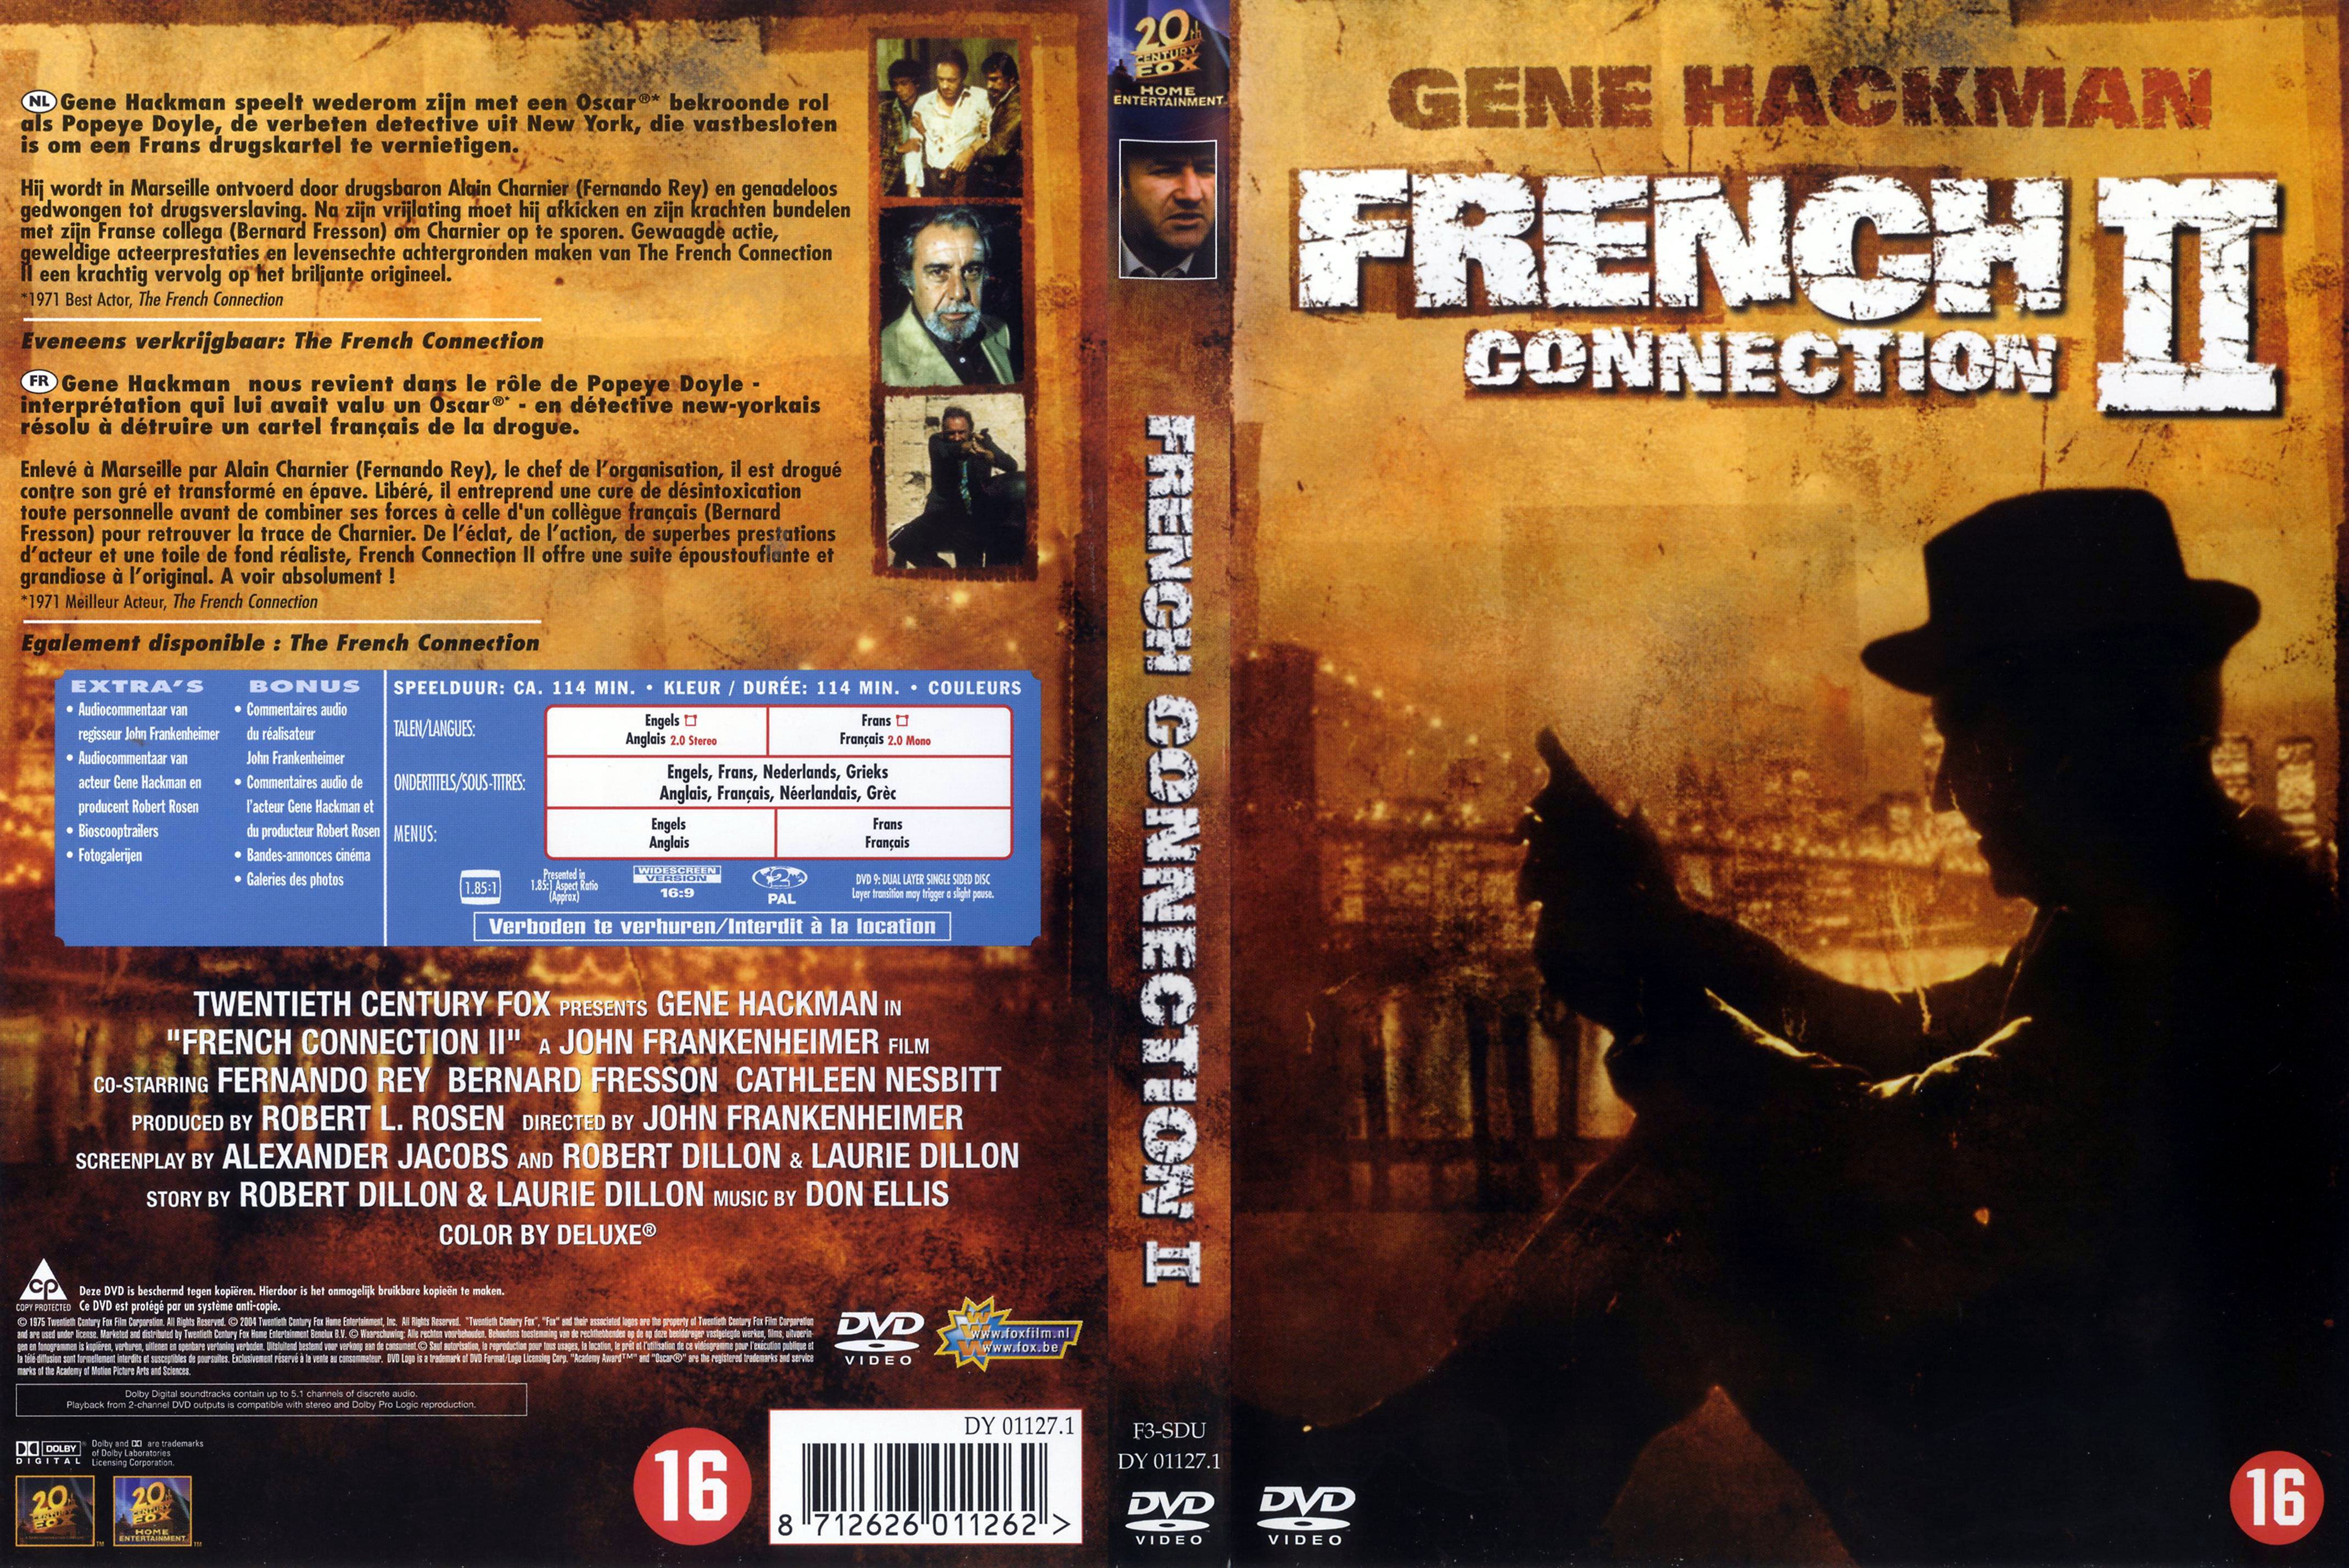 Jaquette DVD French connection 2